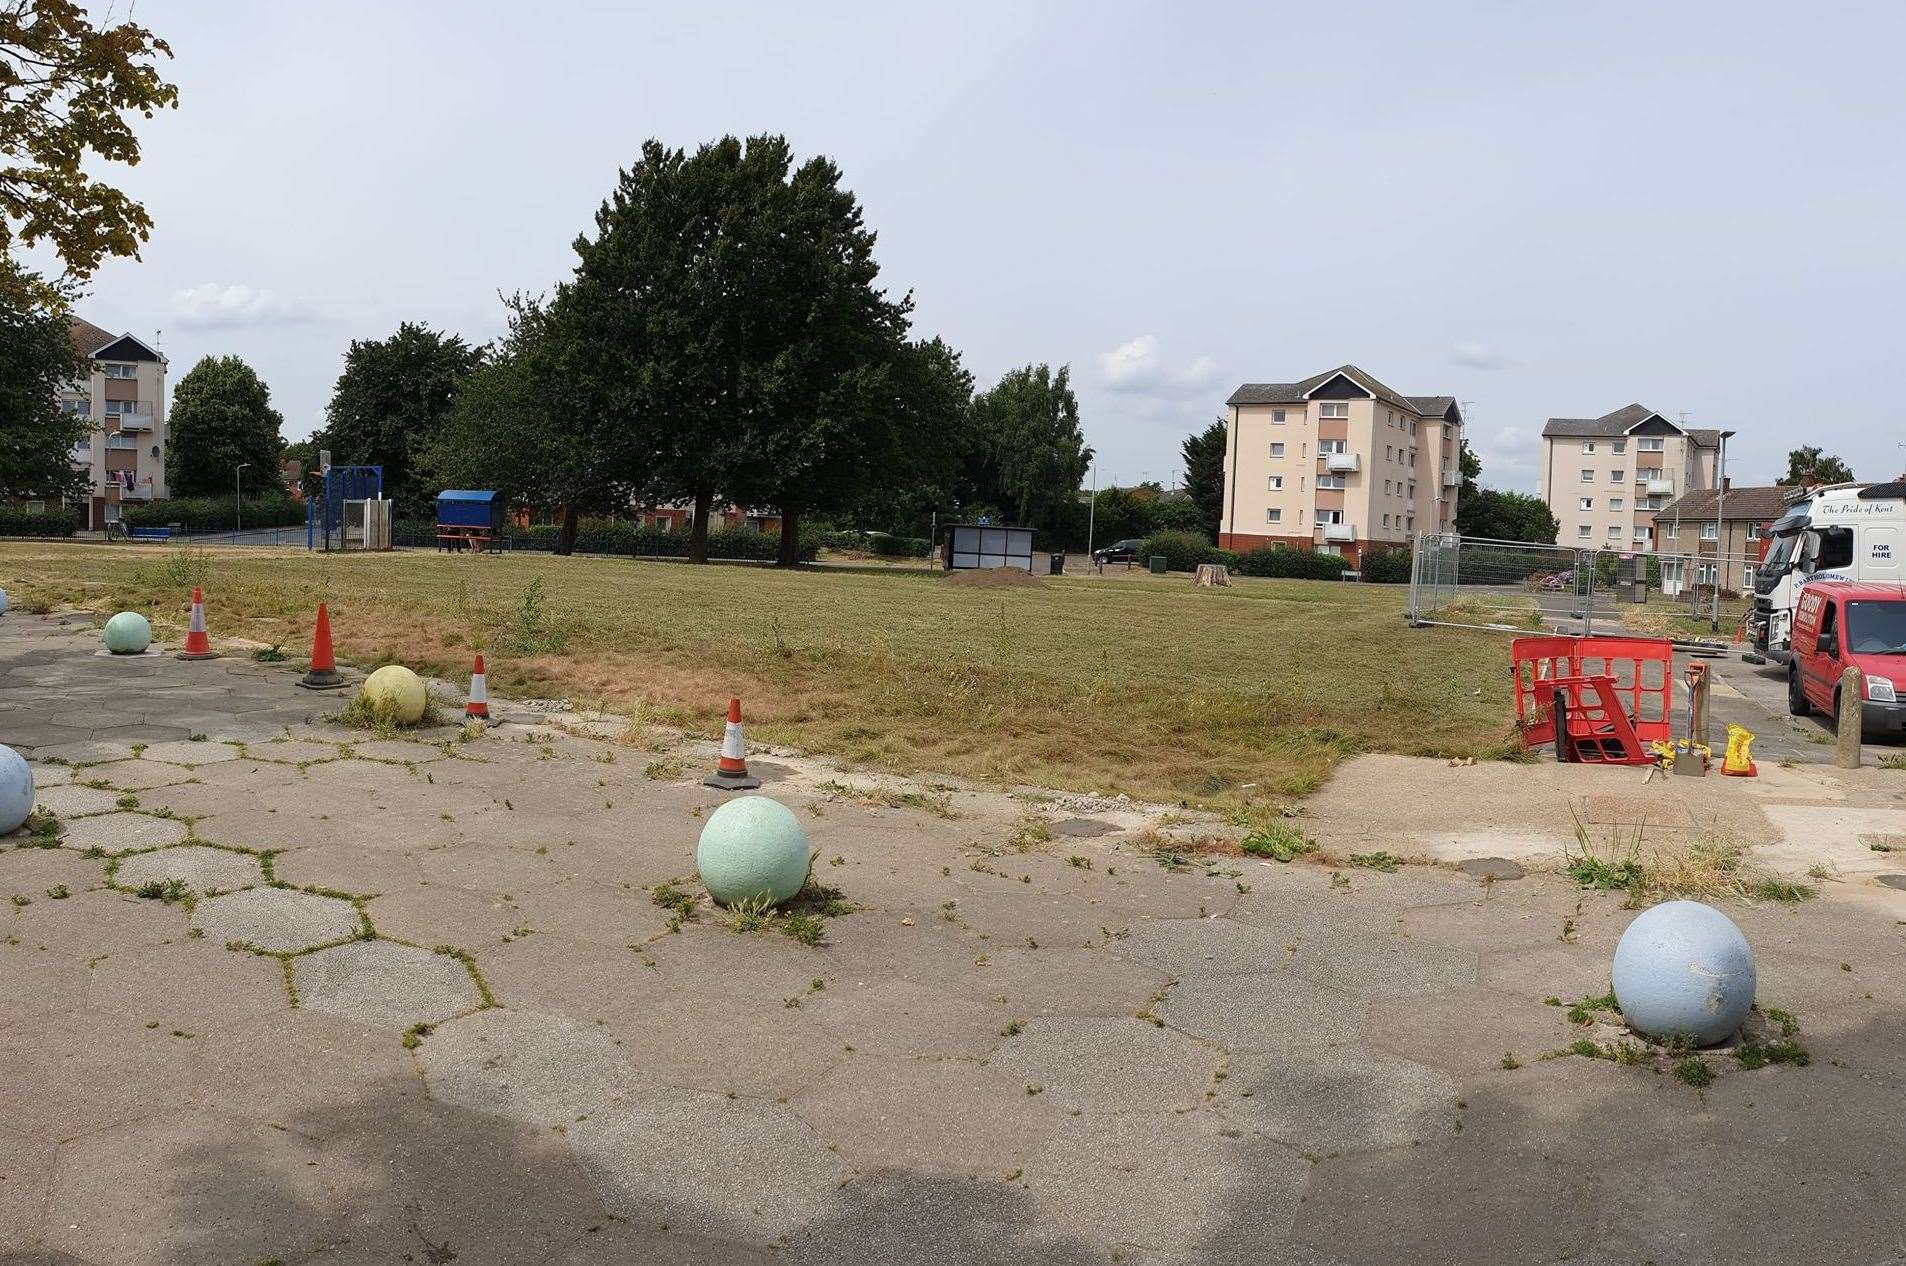 The site of the former community centre. Picture: Ellie Crook